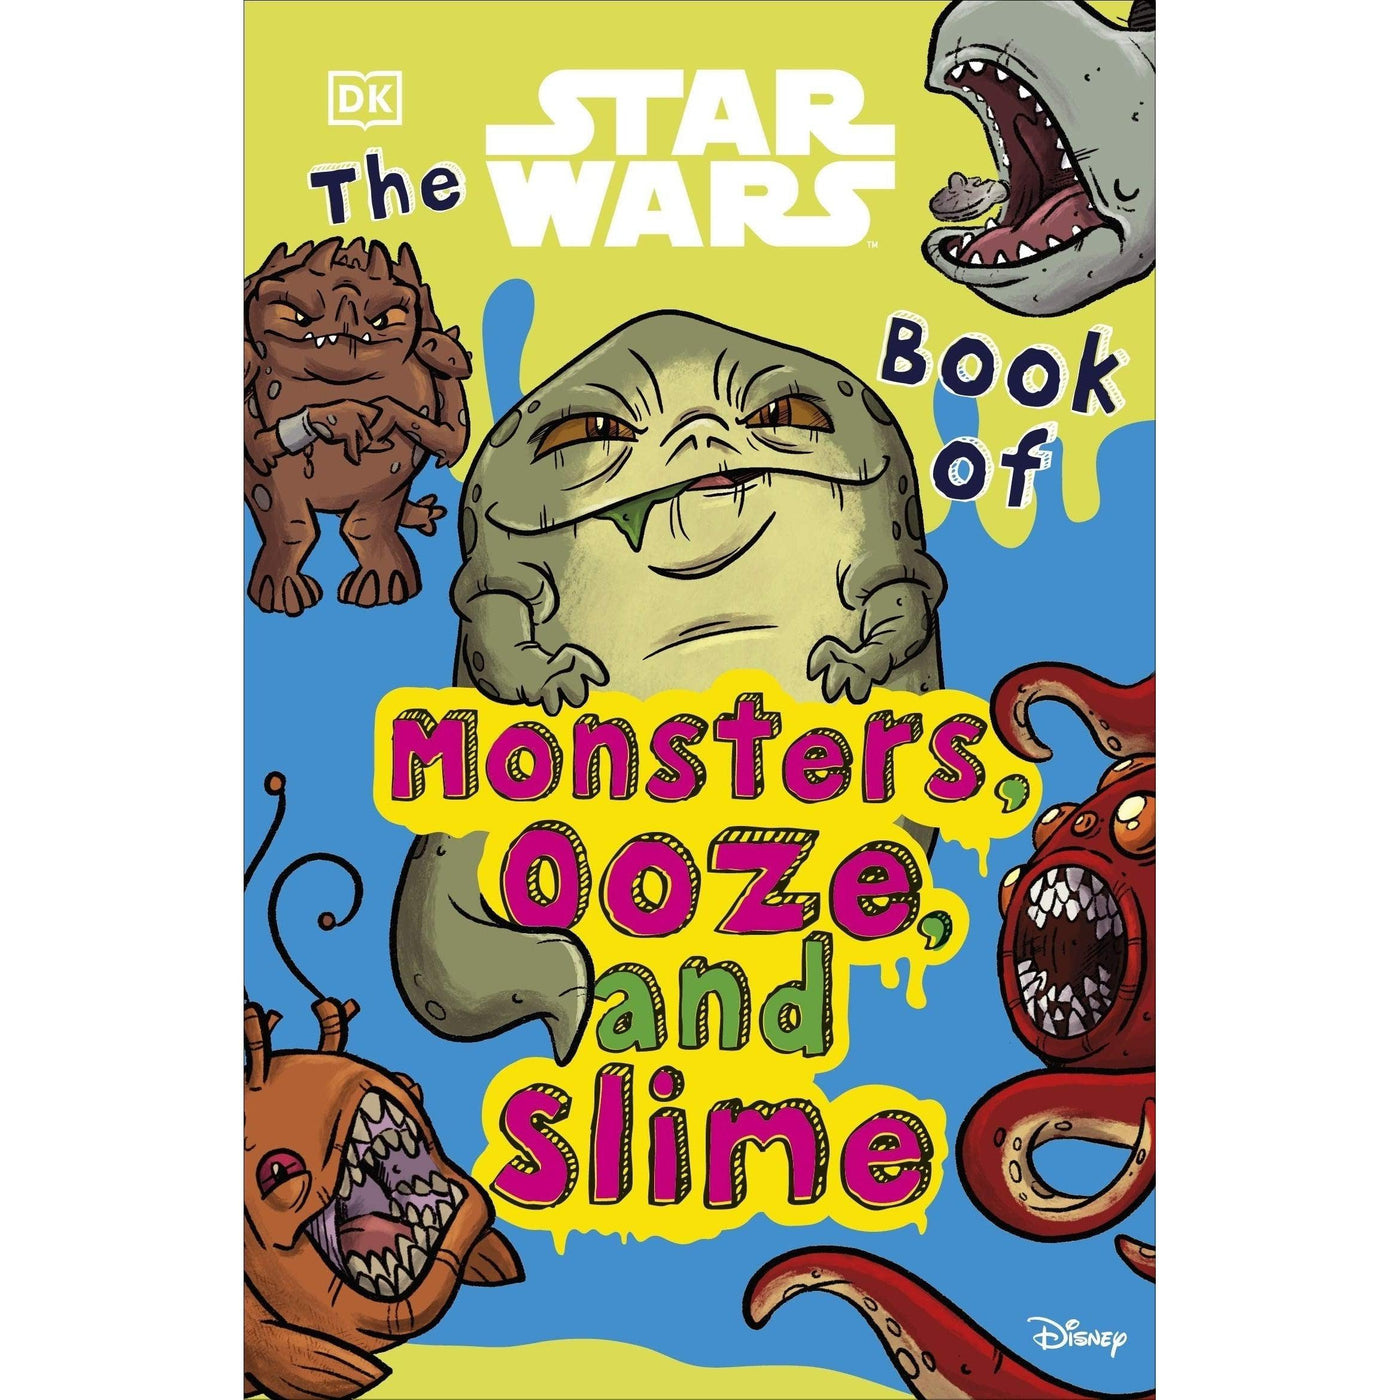 The Star Wars Book of Monsters, Ooze and Slime